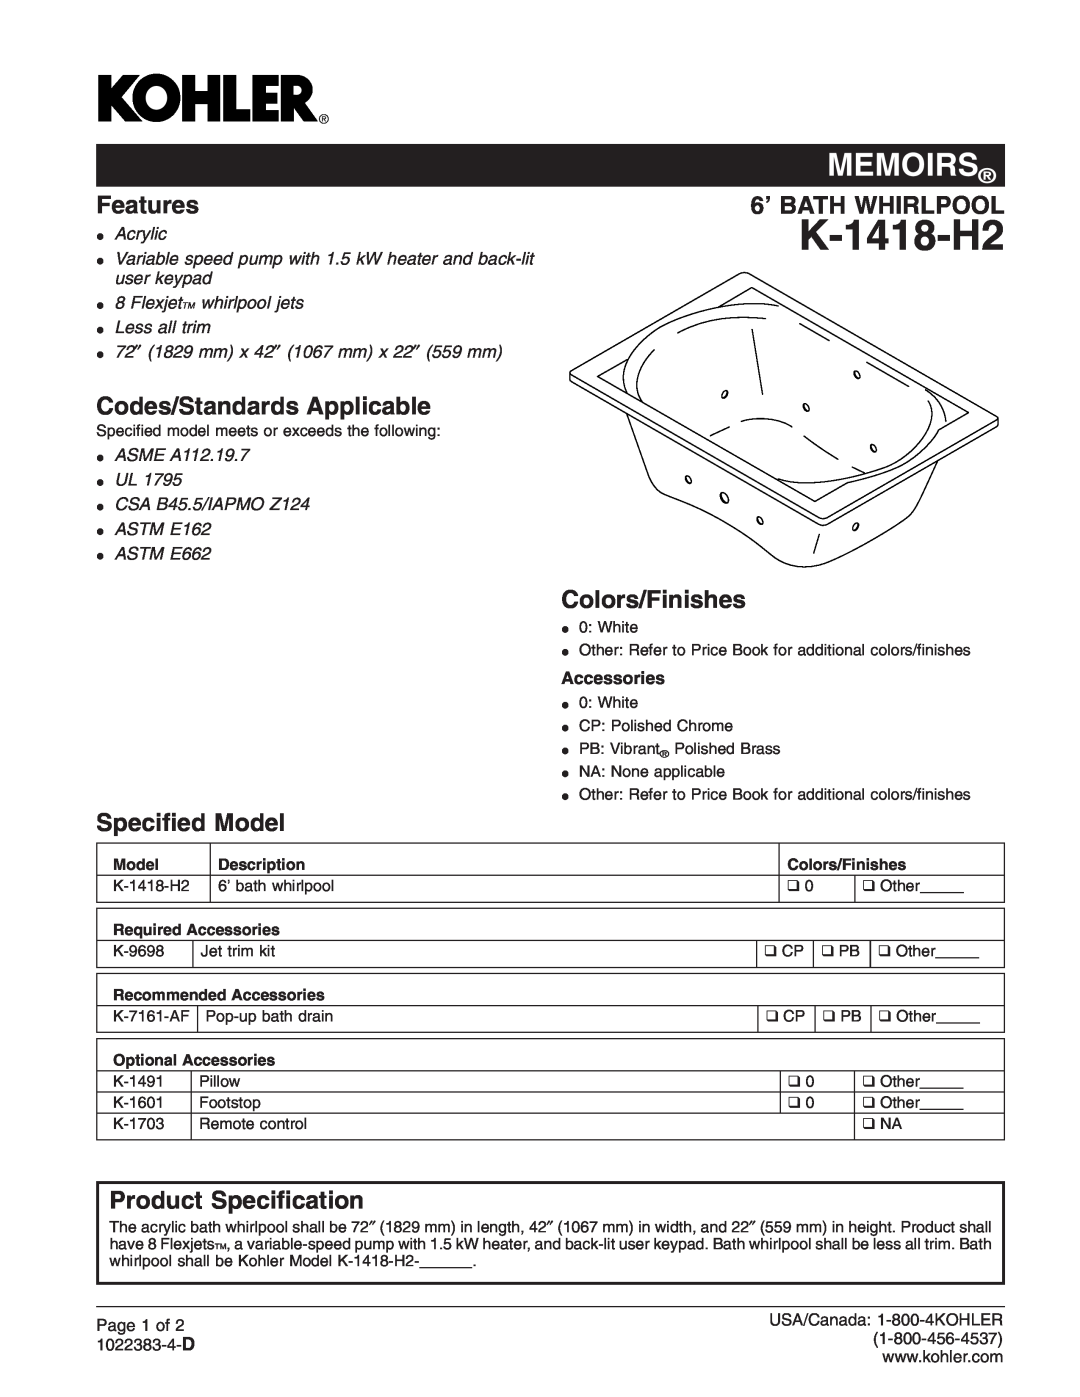 Kohler K-1418-H2 manual Codes/Standards Applicable, Colors/Finishes, Speciﬁed Model, Product Speciﬁcation, Page 1 of 